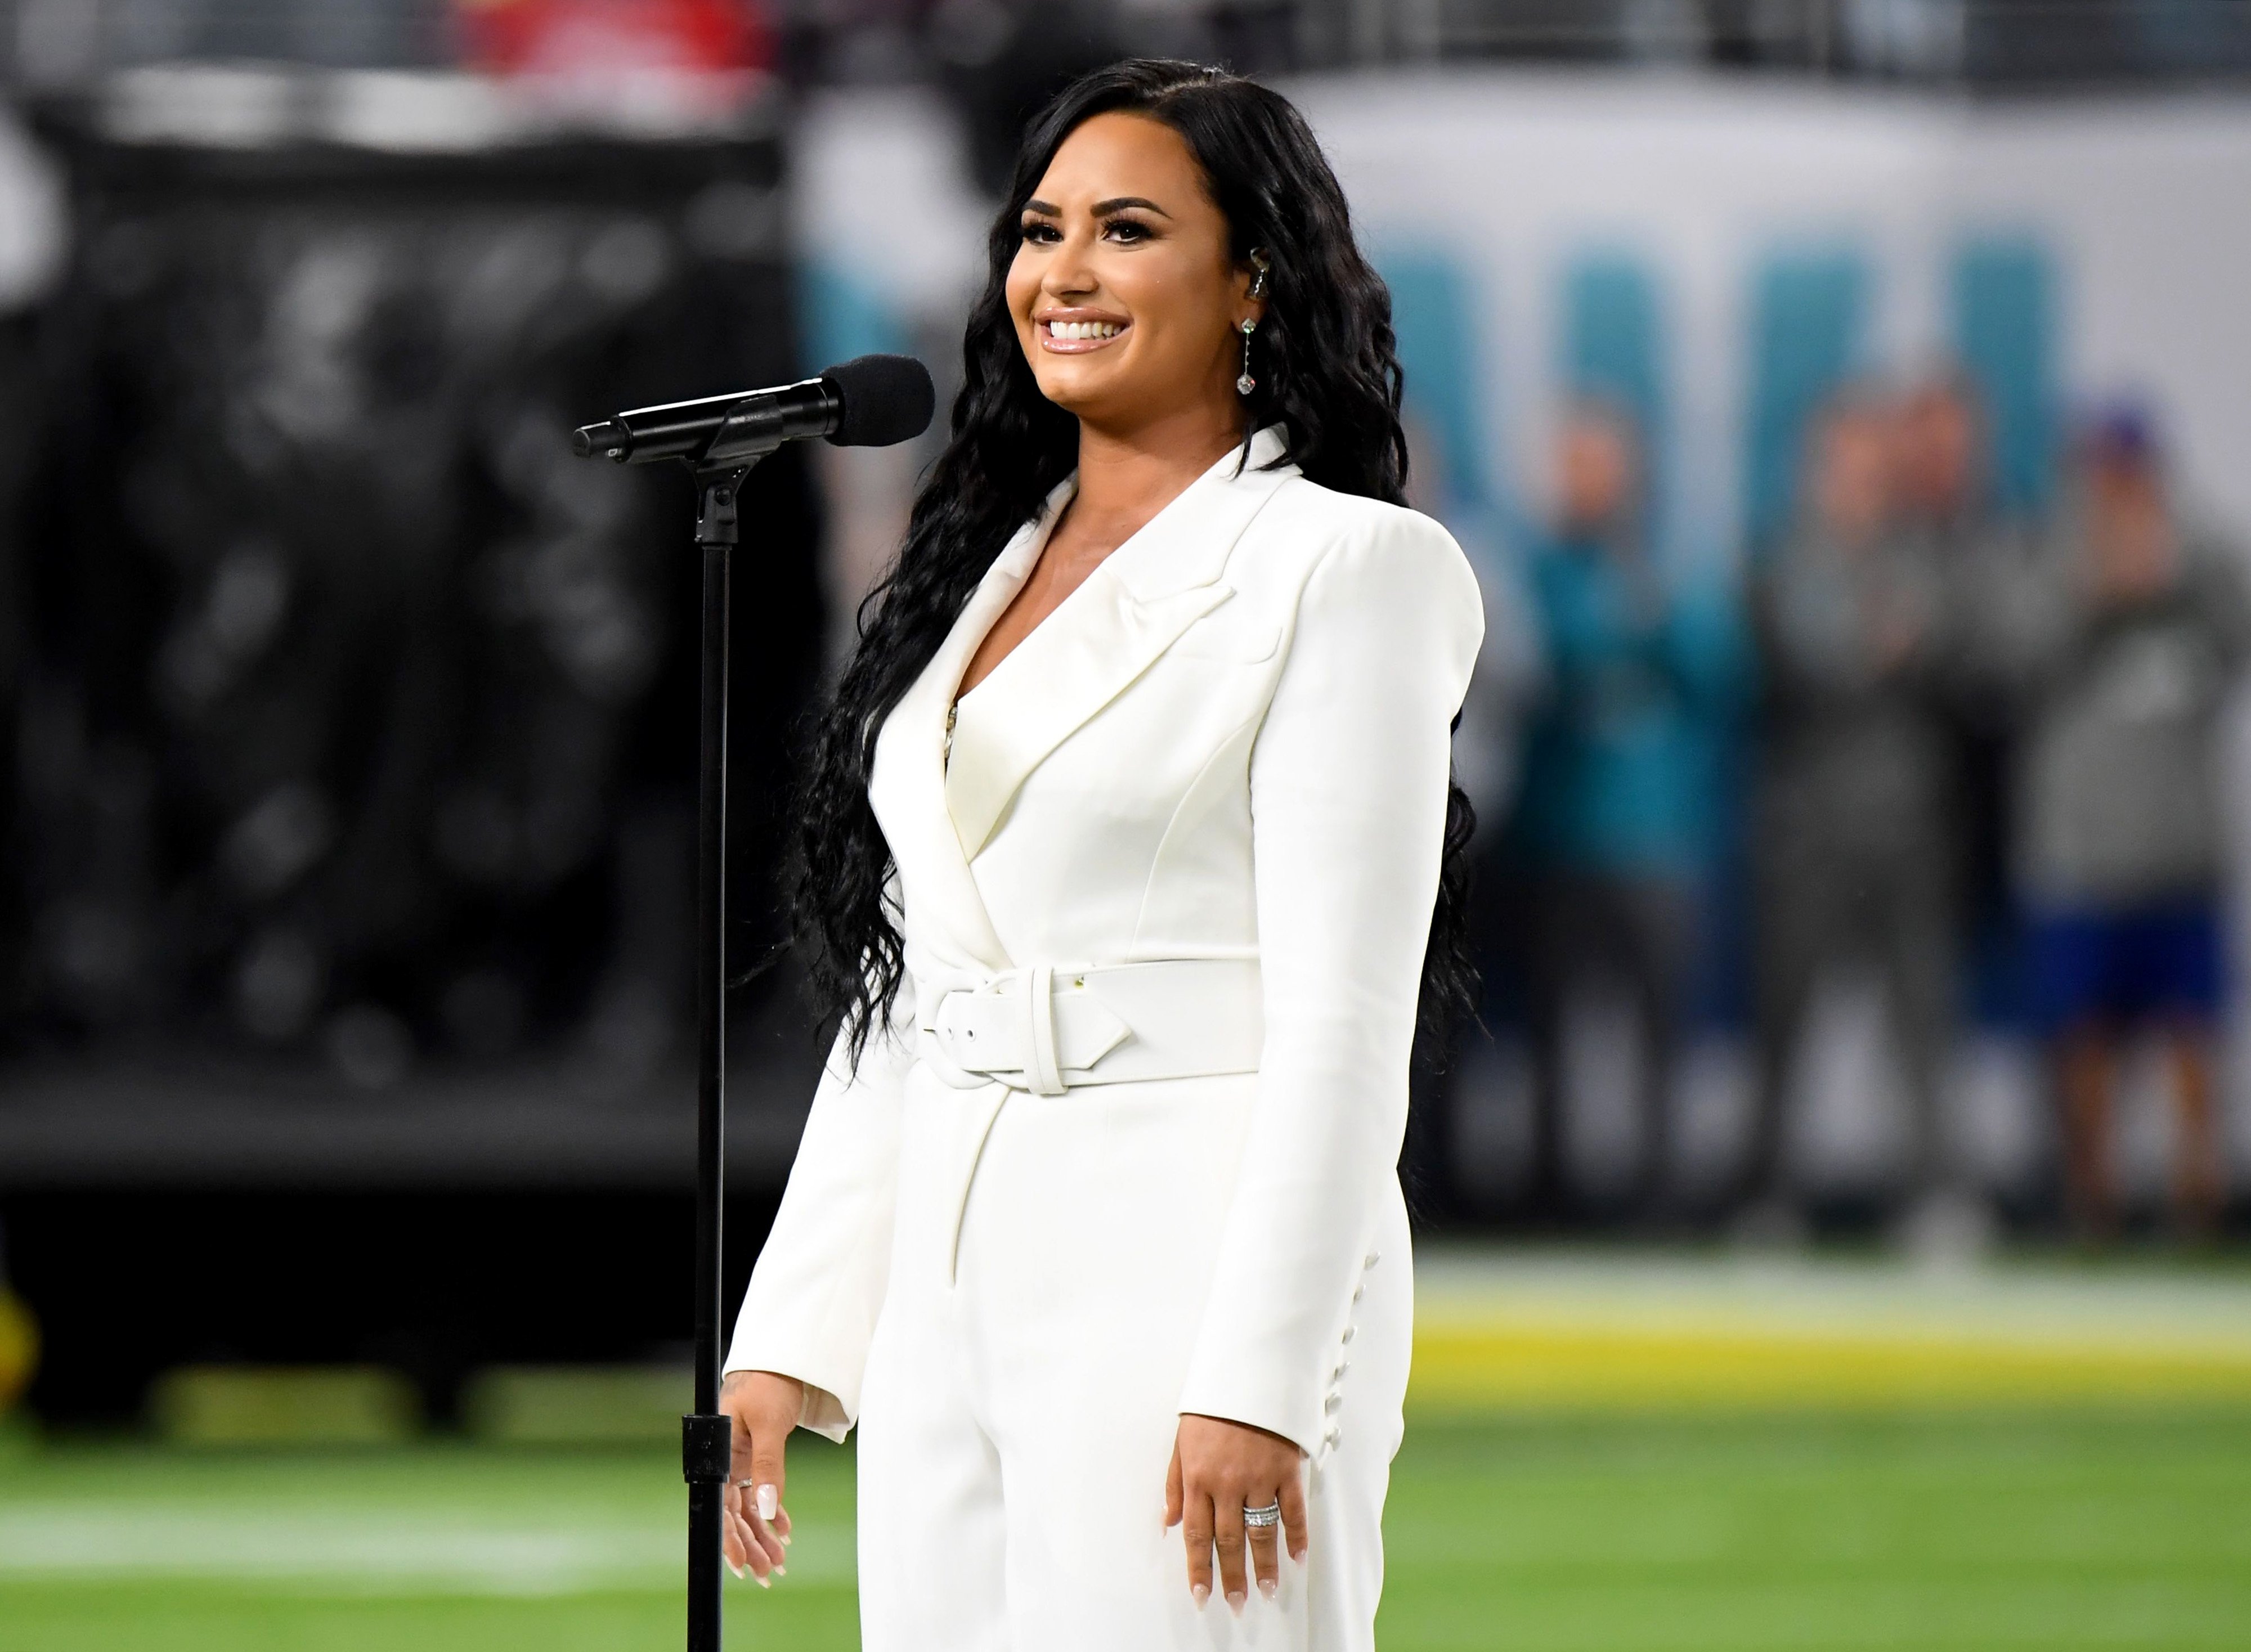 Demi Lovato performs the National Anthem onstage during Super Bowl LIV at Hard Rock Stadium on February 02, 2020 in Miami Gardens, Florida.